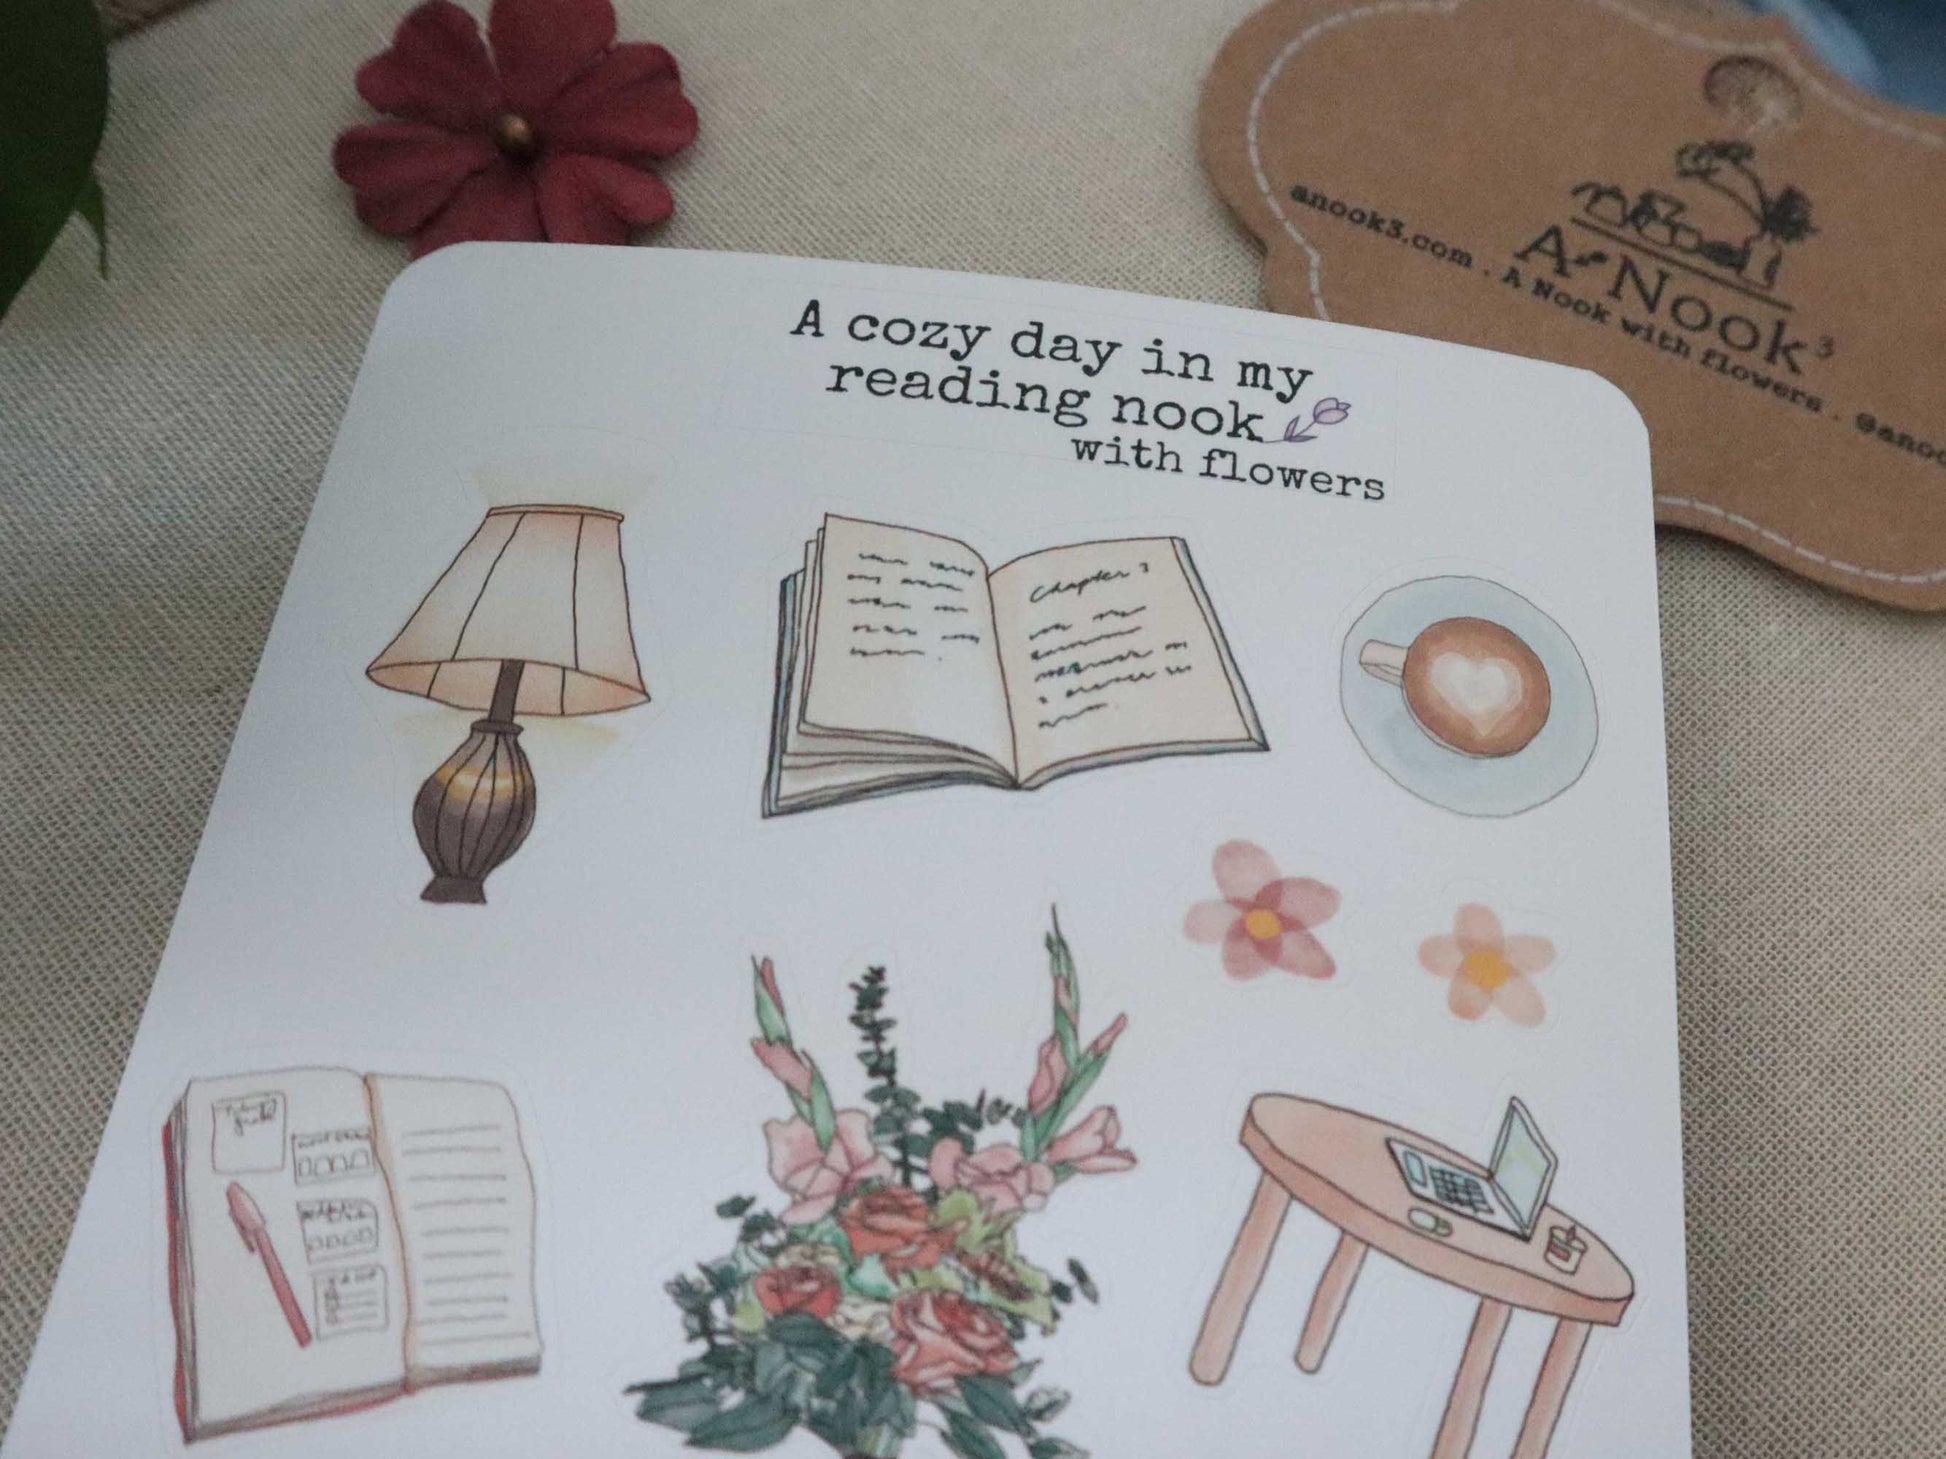 Reading Log Stickers for Bullet Journals. Stickers for Planners